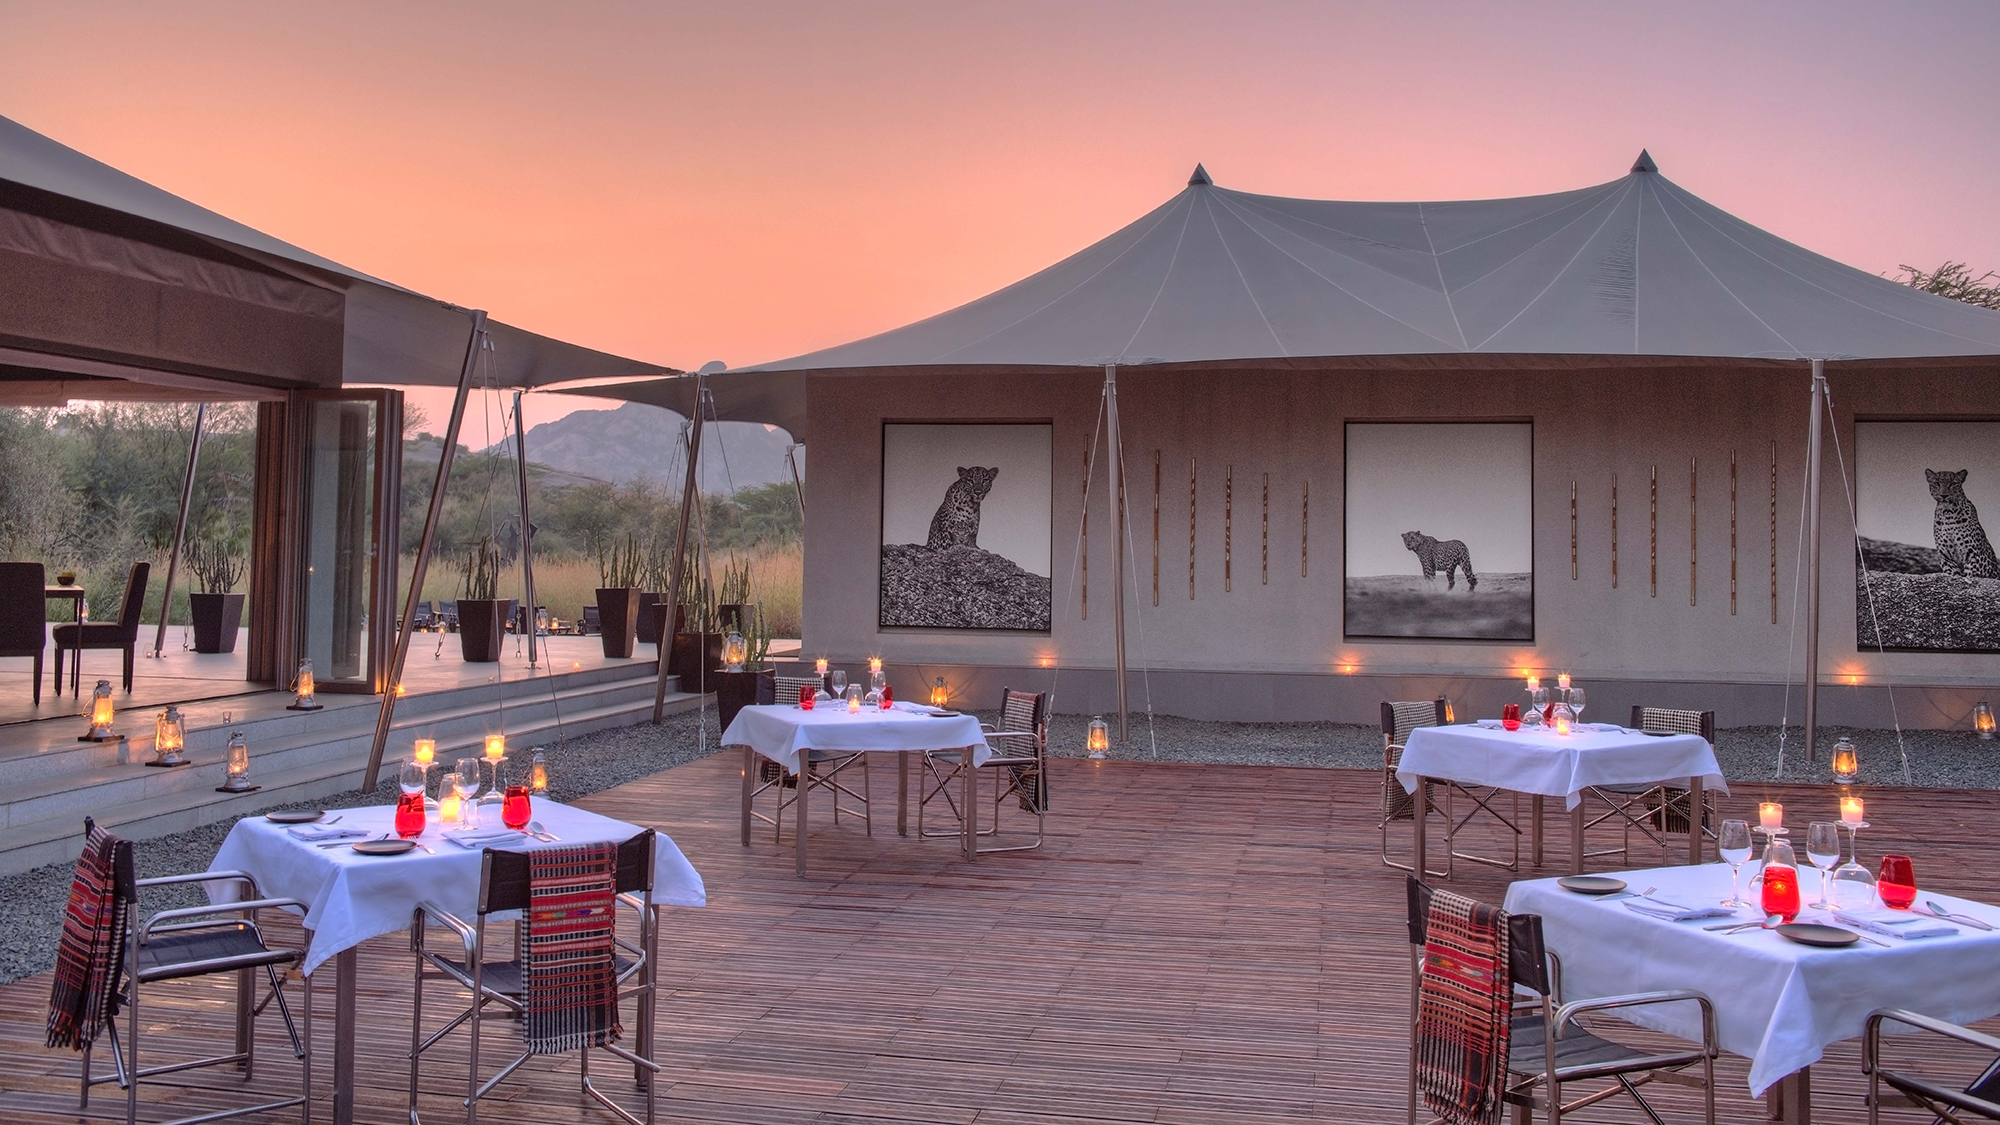 The Art of Glamping: The World’s Most Luxurious Tented Accommodations